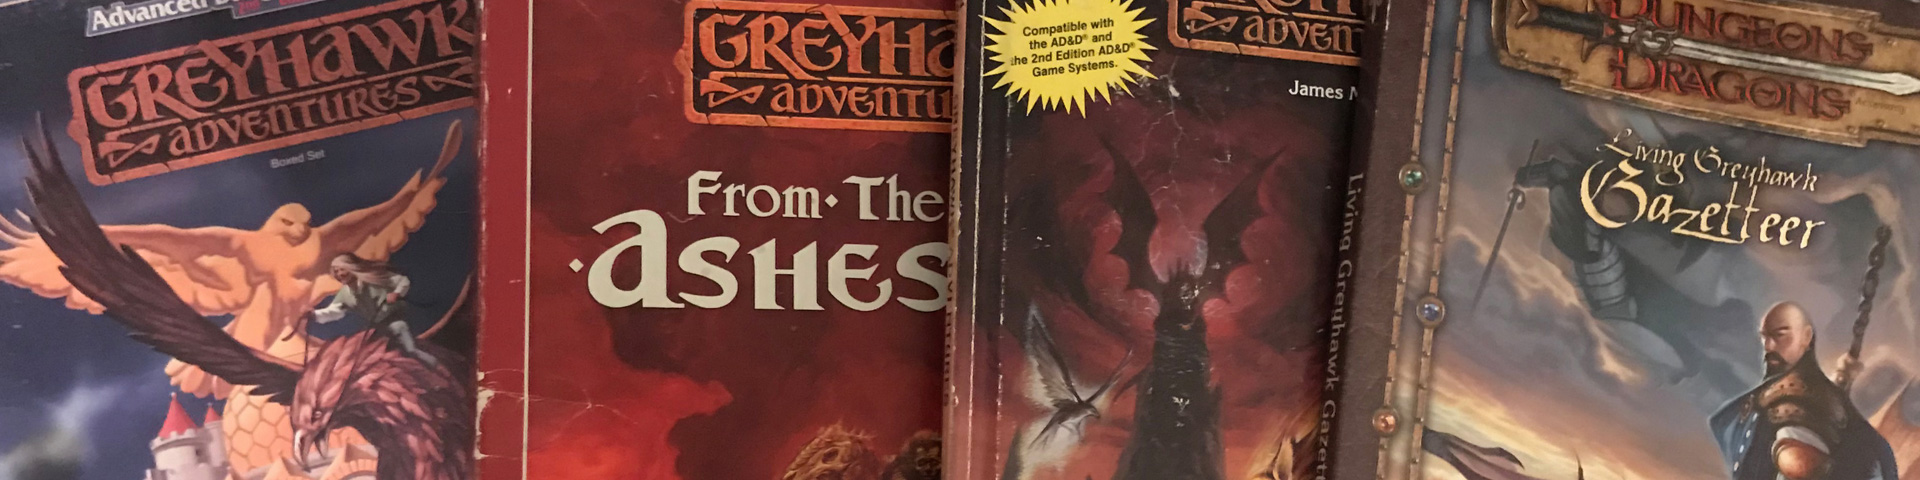 Two RPG boxed sets and two RPG books, all connected to the World of Greyhak campaign setting.